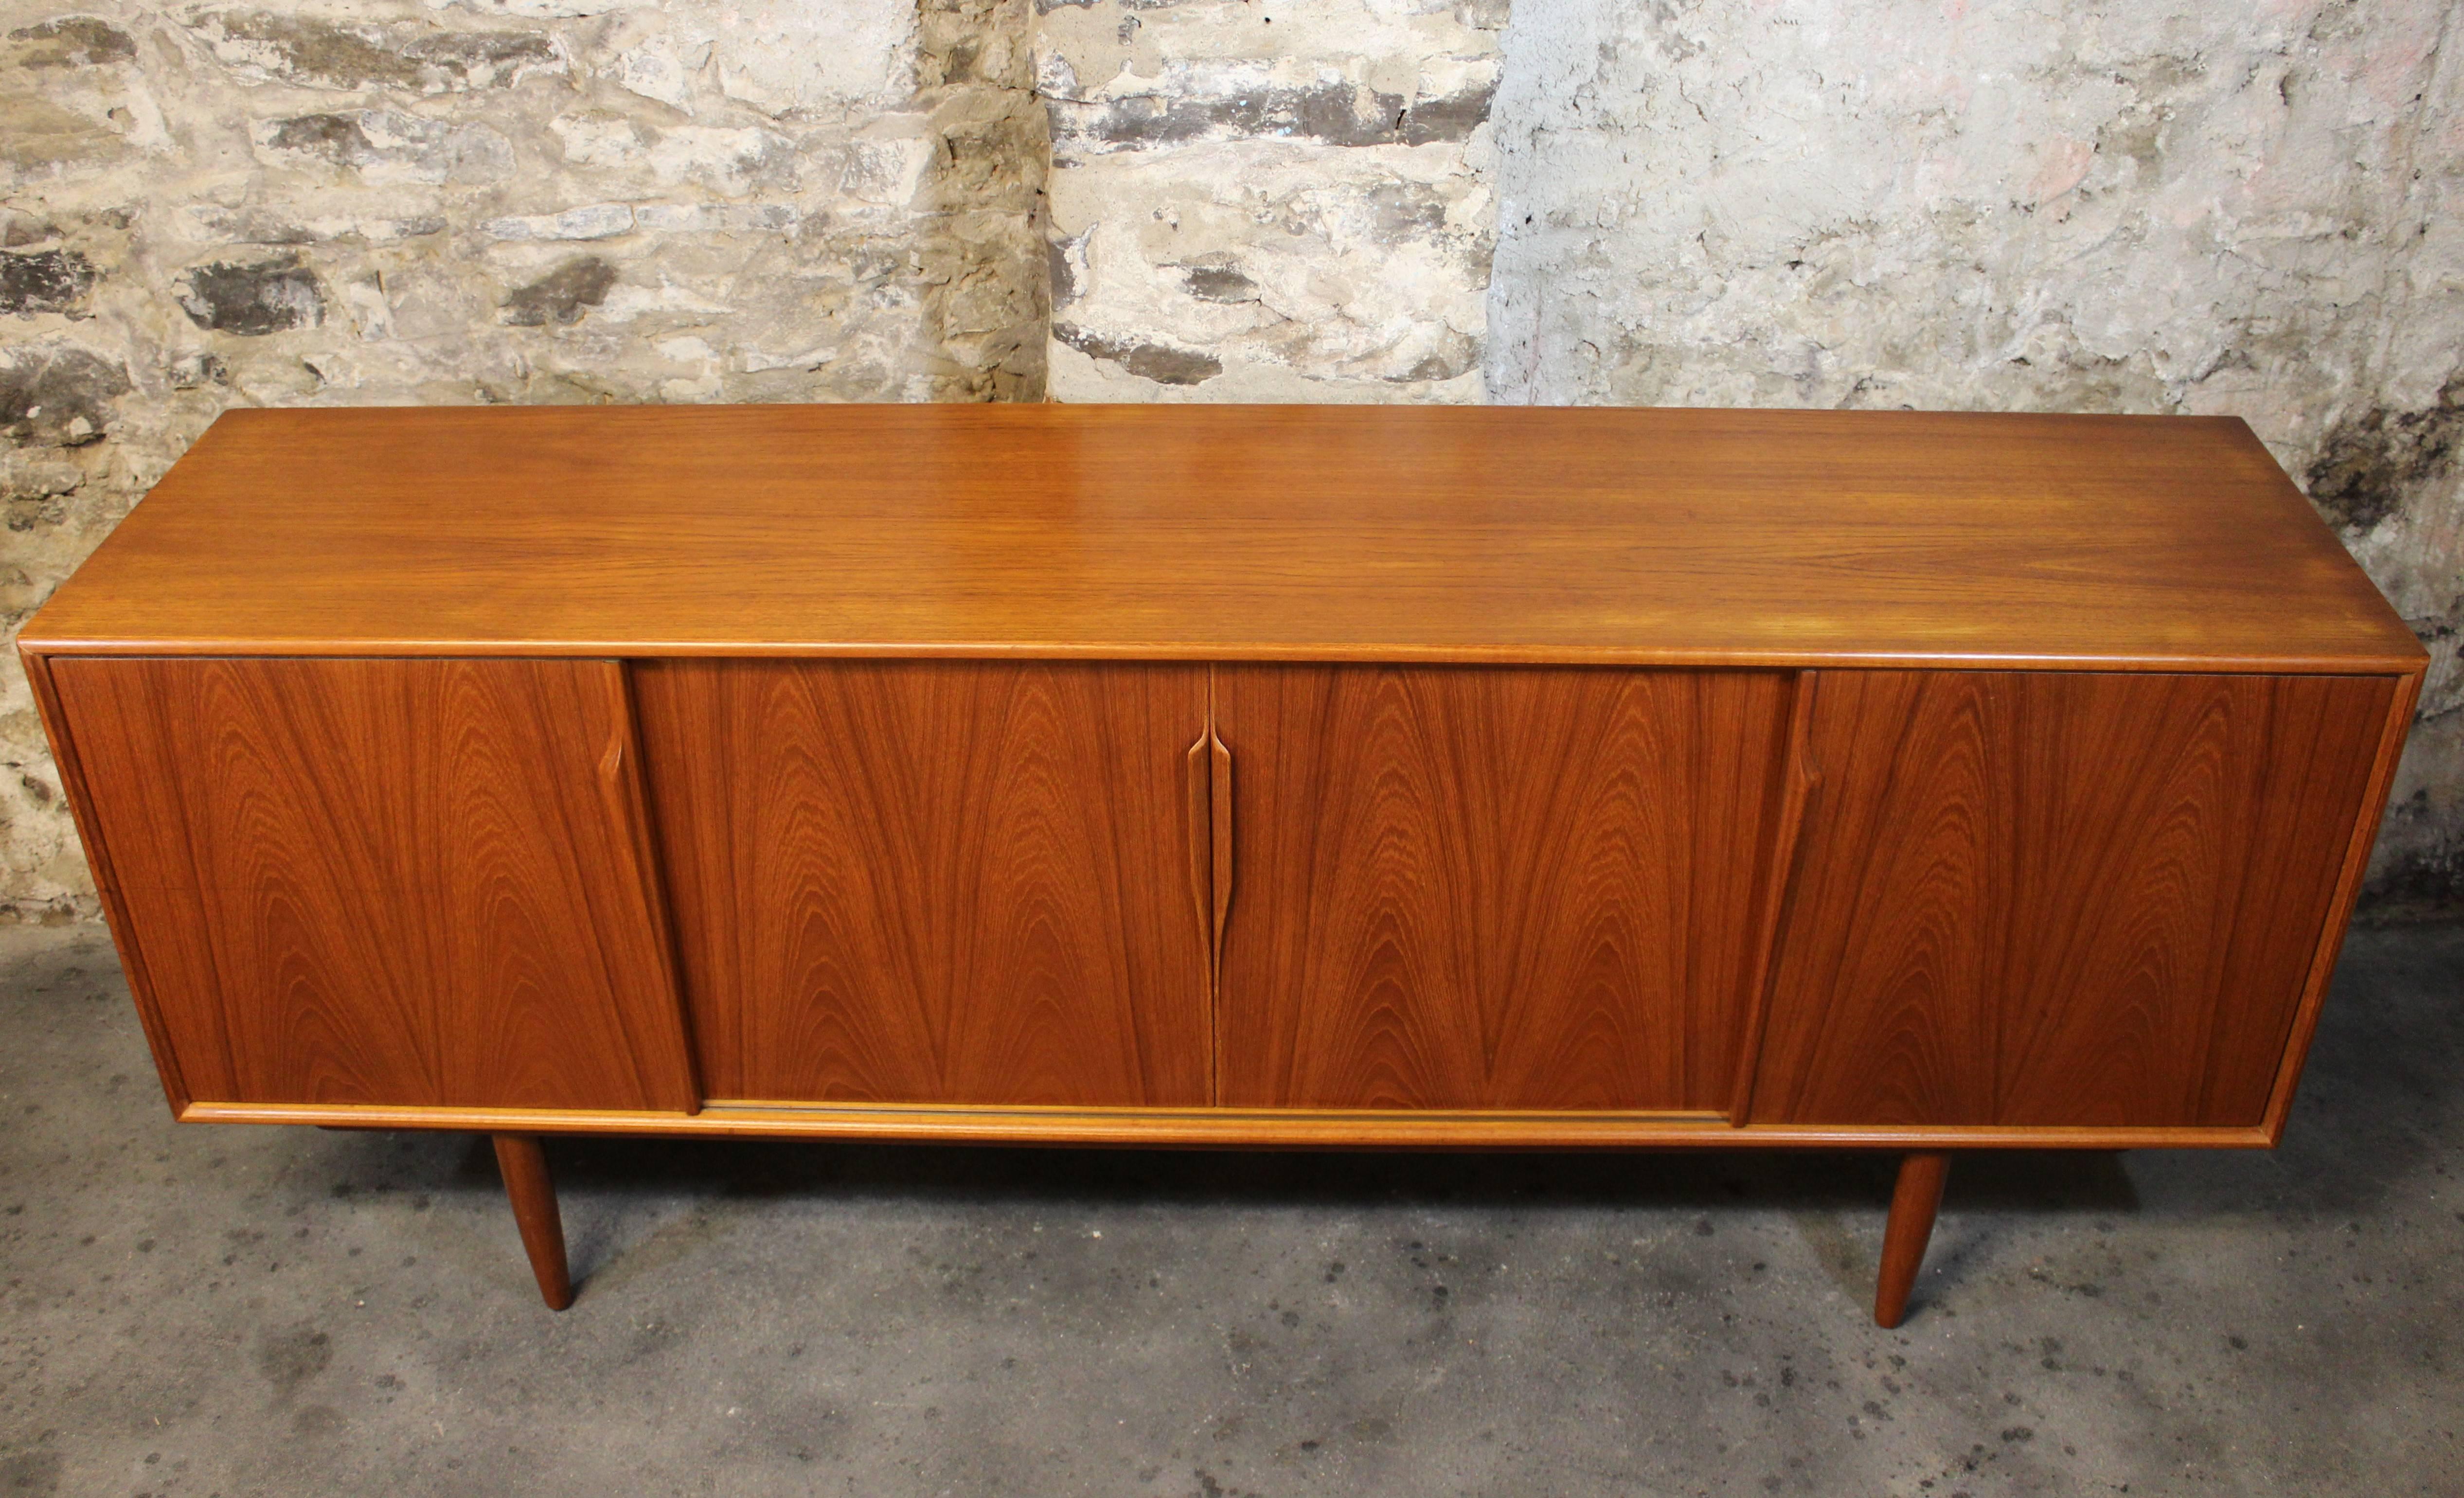 Solid teak credenza by Gunni Omann for Axel Christensen Odder. This fabulous example has sculptural solid teak handles with subtly tapered solid teak legs. The middle of the chest has three dovetailed pull-out drawers while the left and right sides